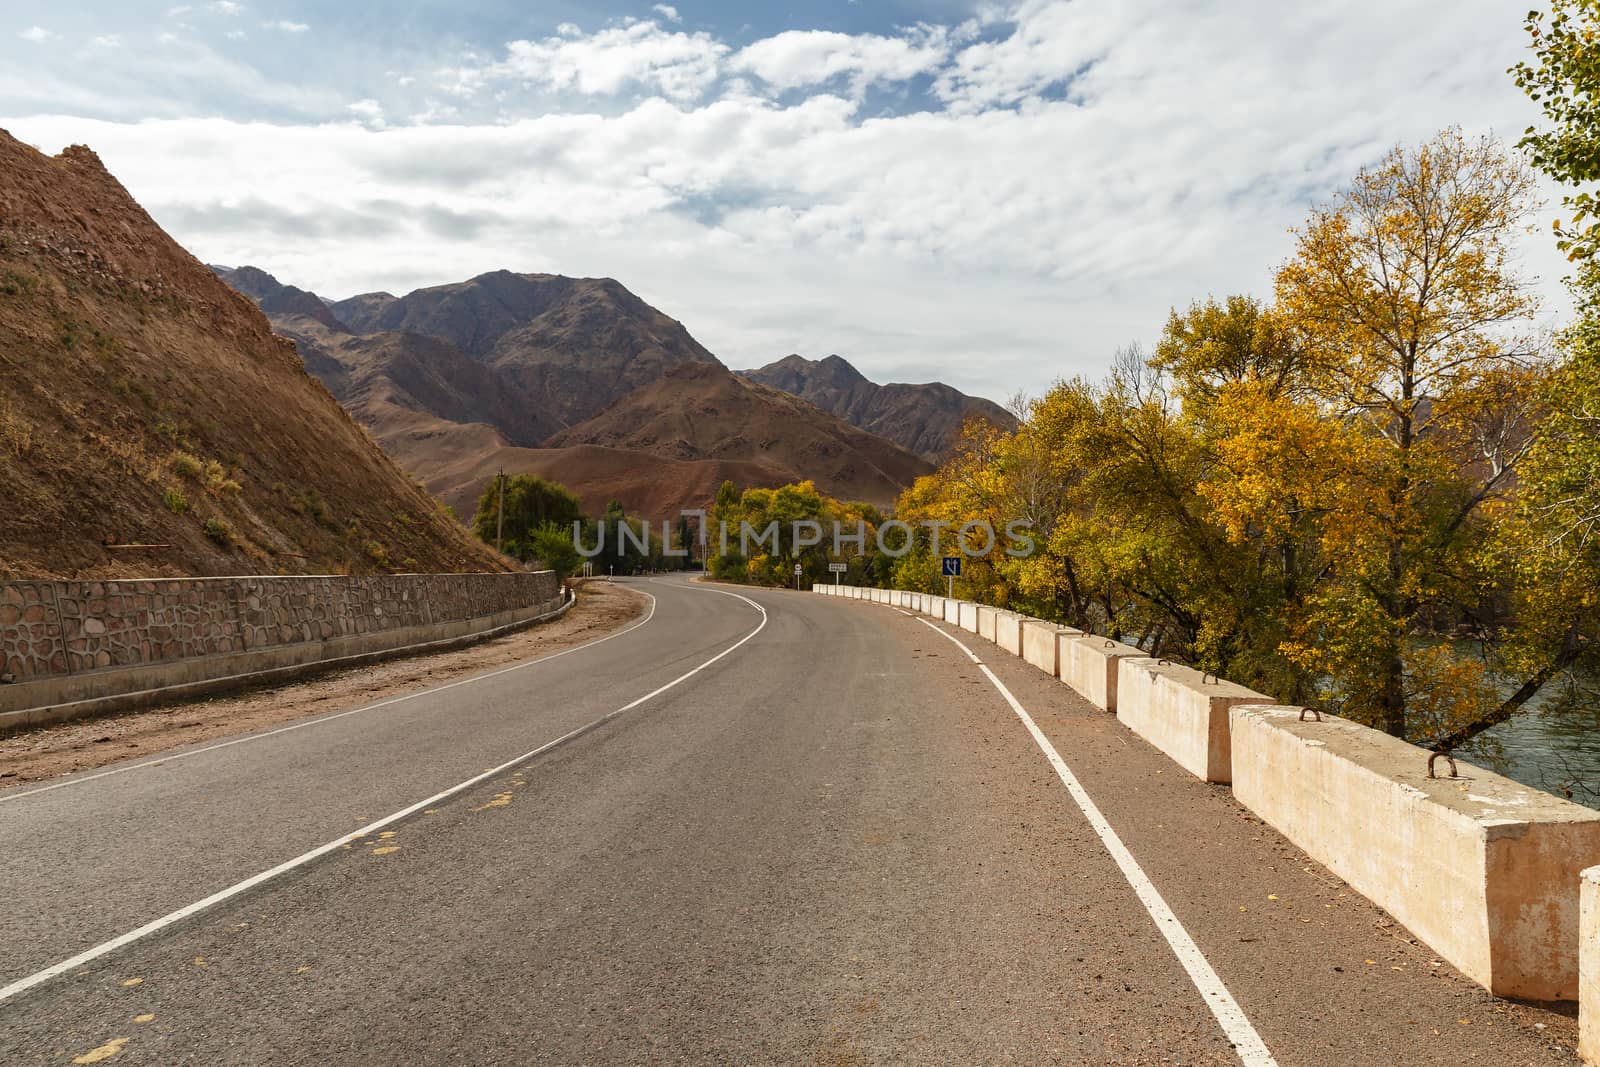 A 367 highway, passing in the Naryn region of Kyrgyzstan, near the village of Aral.